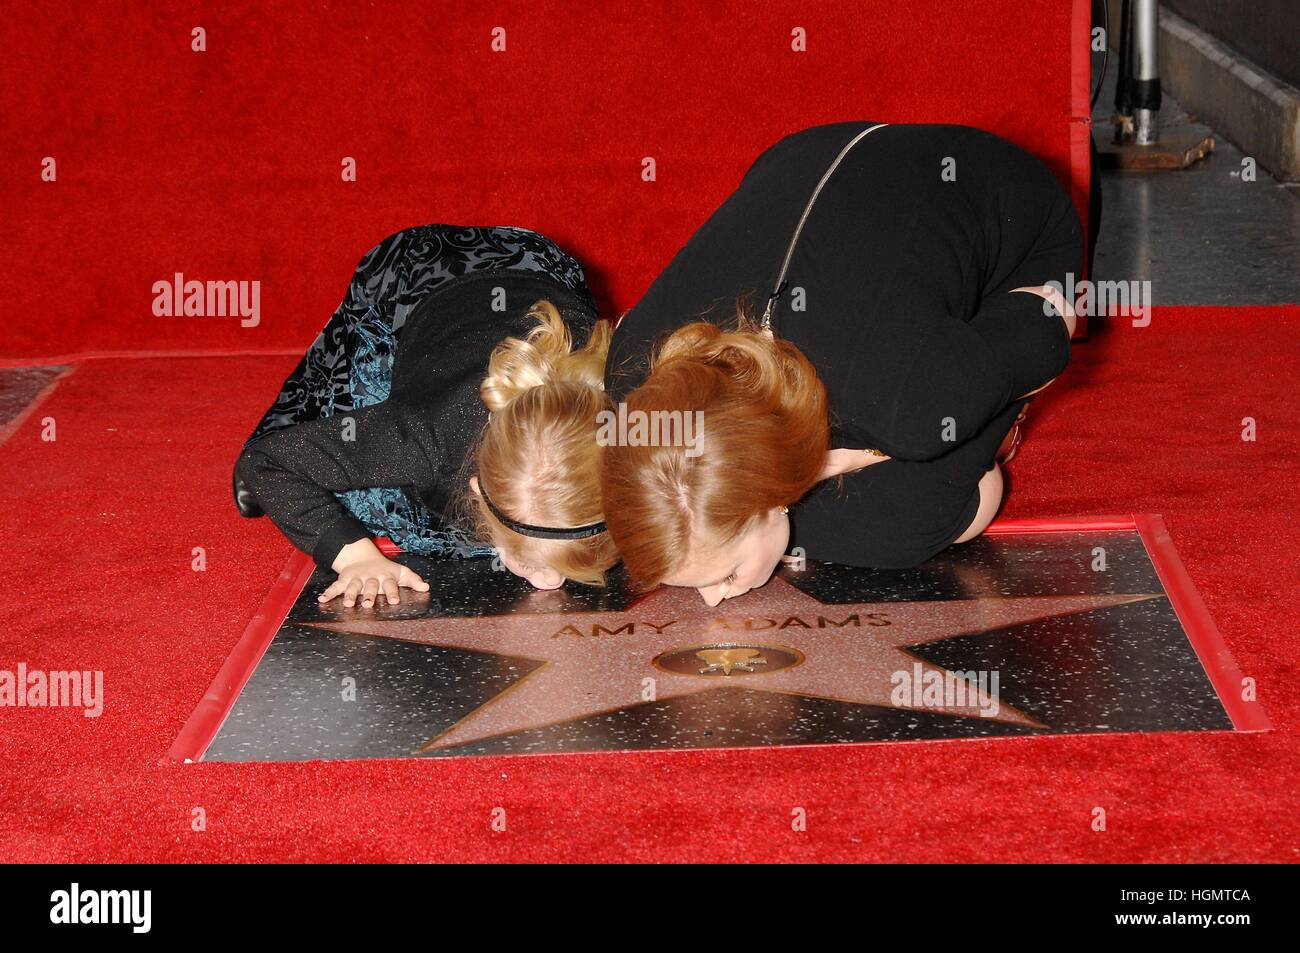 Los Angeles, USA. 11th Jan, 2017. Aviana Olea Le Gallo, Amy Adams at the induction ceremony for Star on the Hollywood Walk of Fame for Amy Adams, Hollywood Boulevard, Los Angeles, CA. Credit: Michael Germana/Everett Collection/Alamy Live News Stock Photo